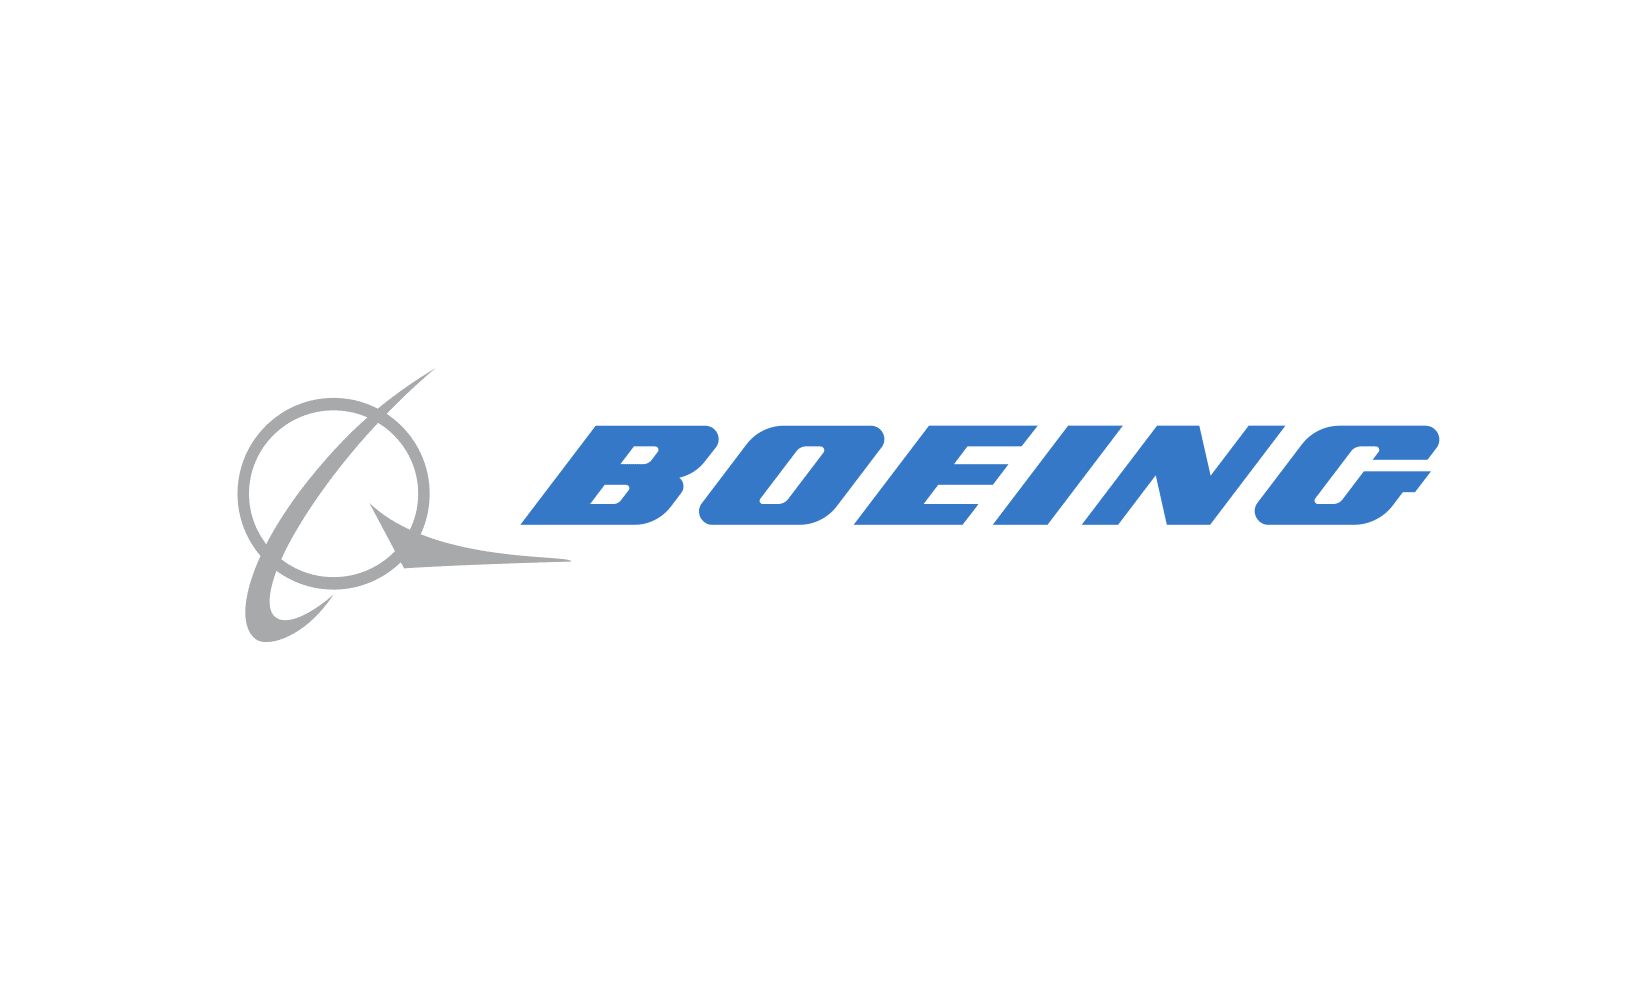 BOEING-1.png